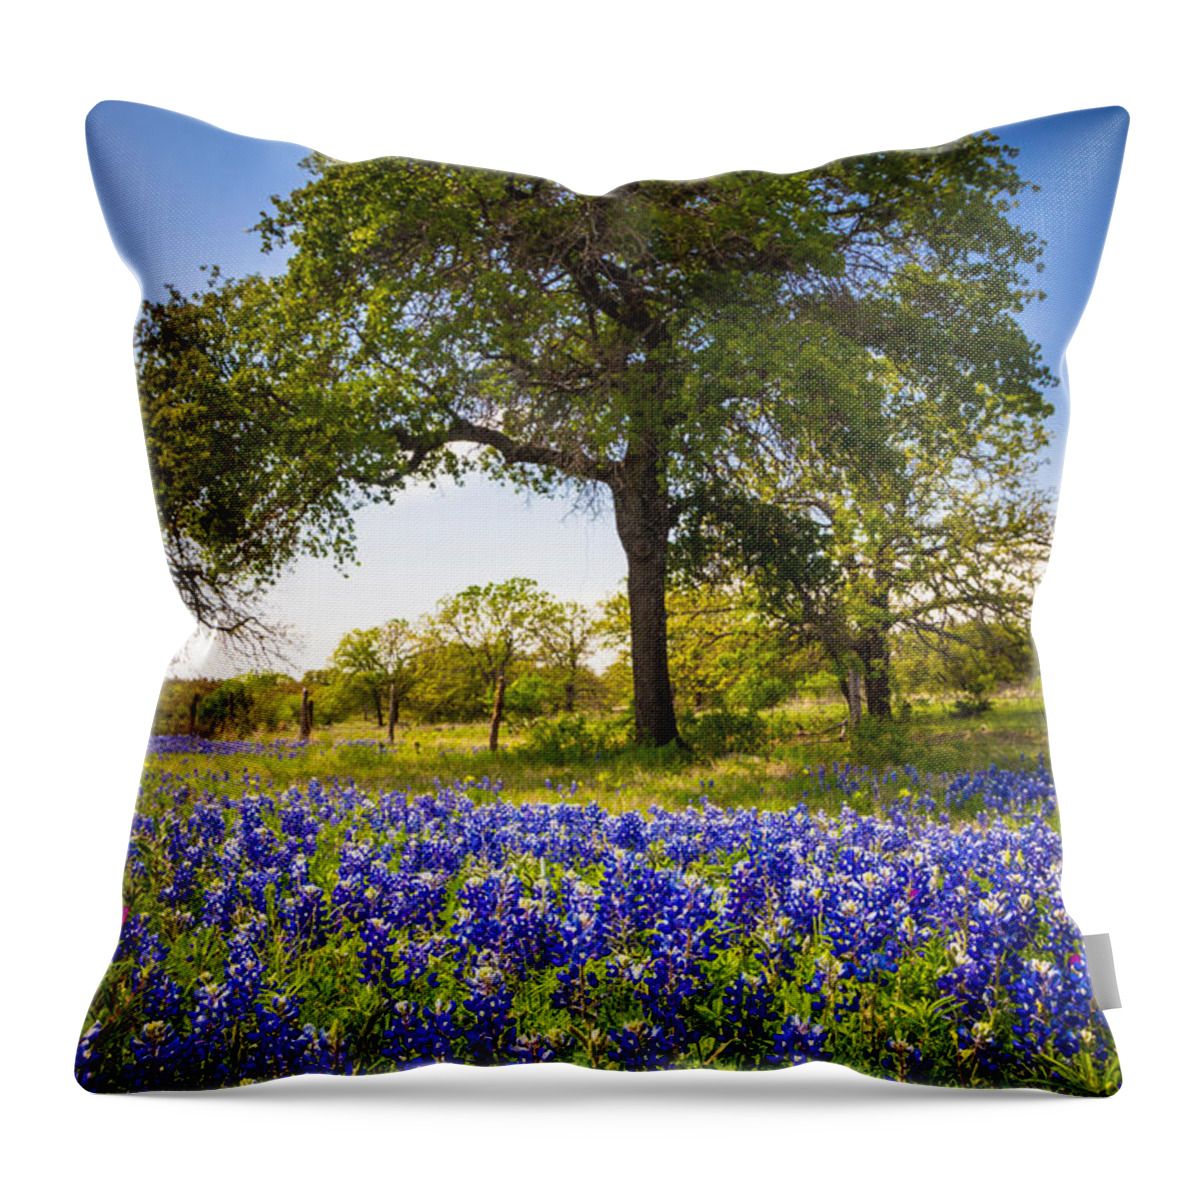 America Throw Pillow featuring the photograph Bluebonnet Meadow by Inge Johnsson